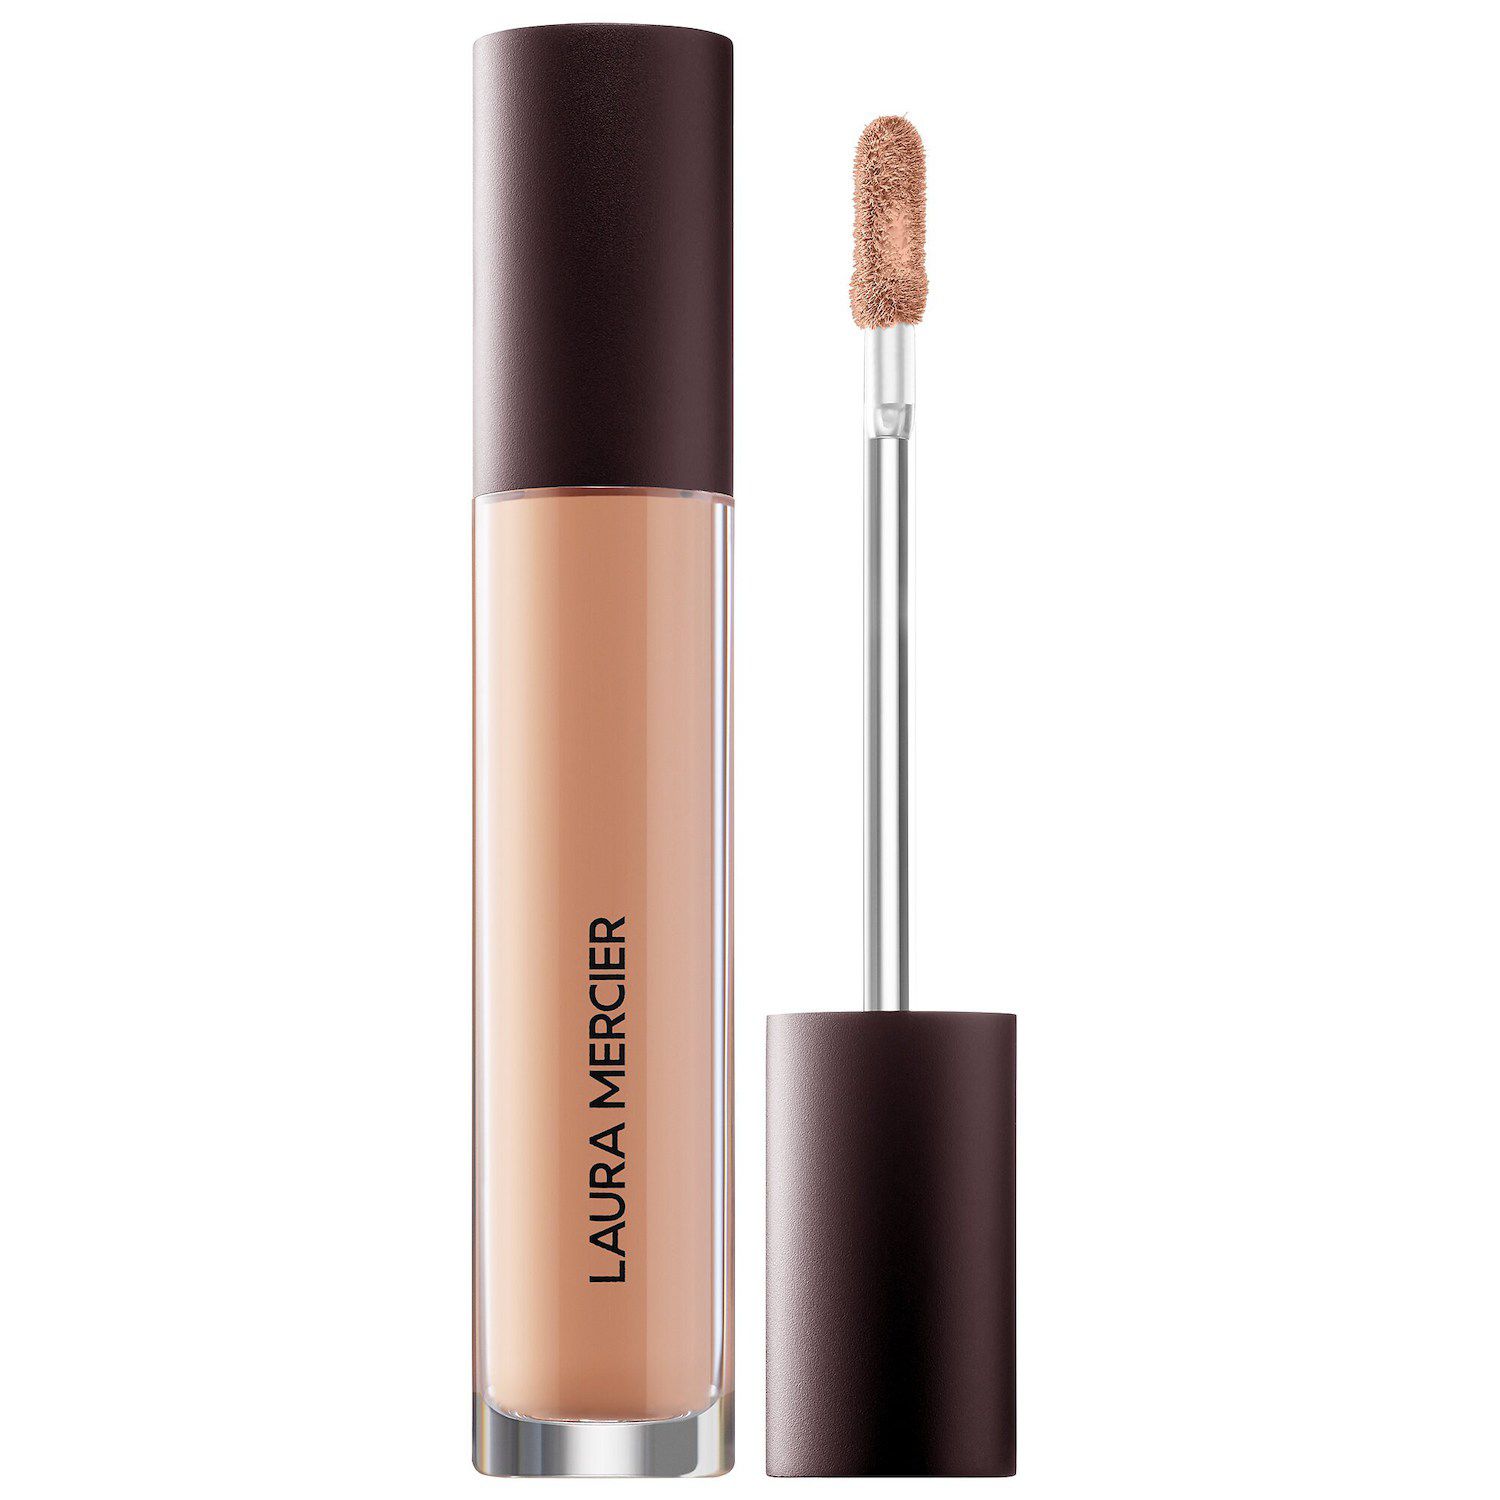 Image for Laura Mercier Flawless Fusion Ultra Longwear Concealer at Kohl's.